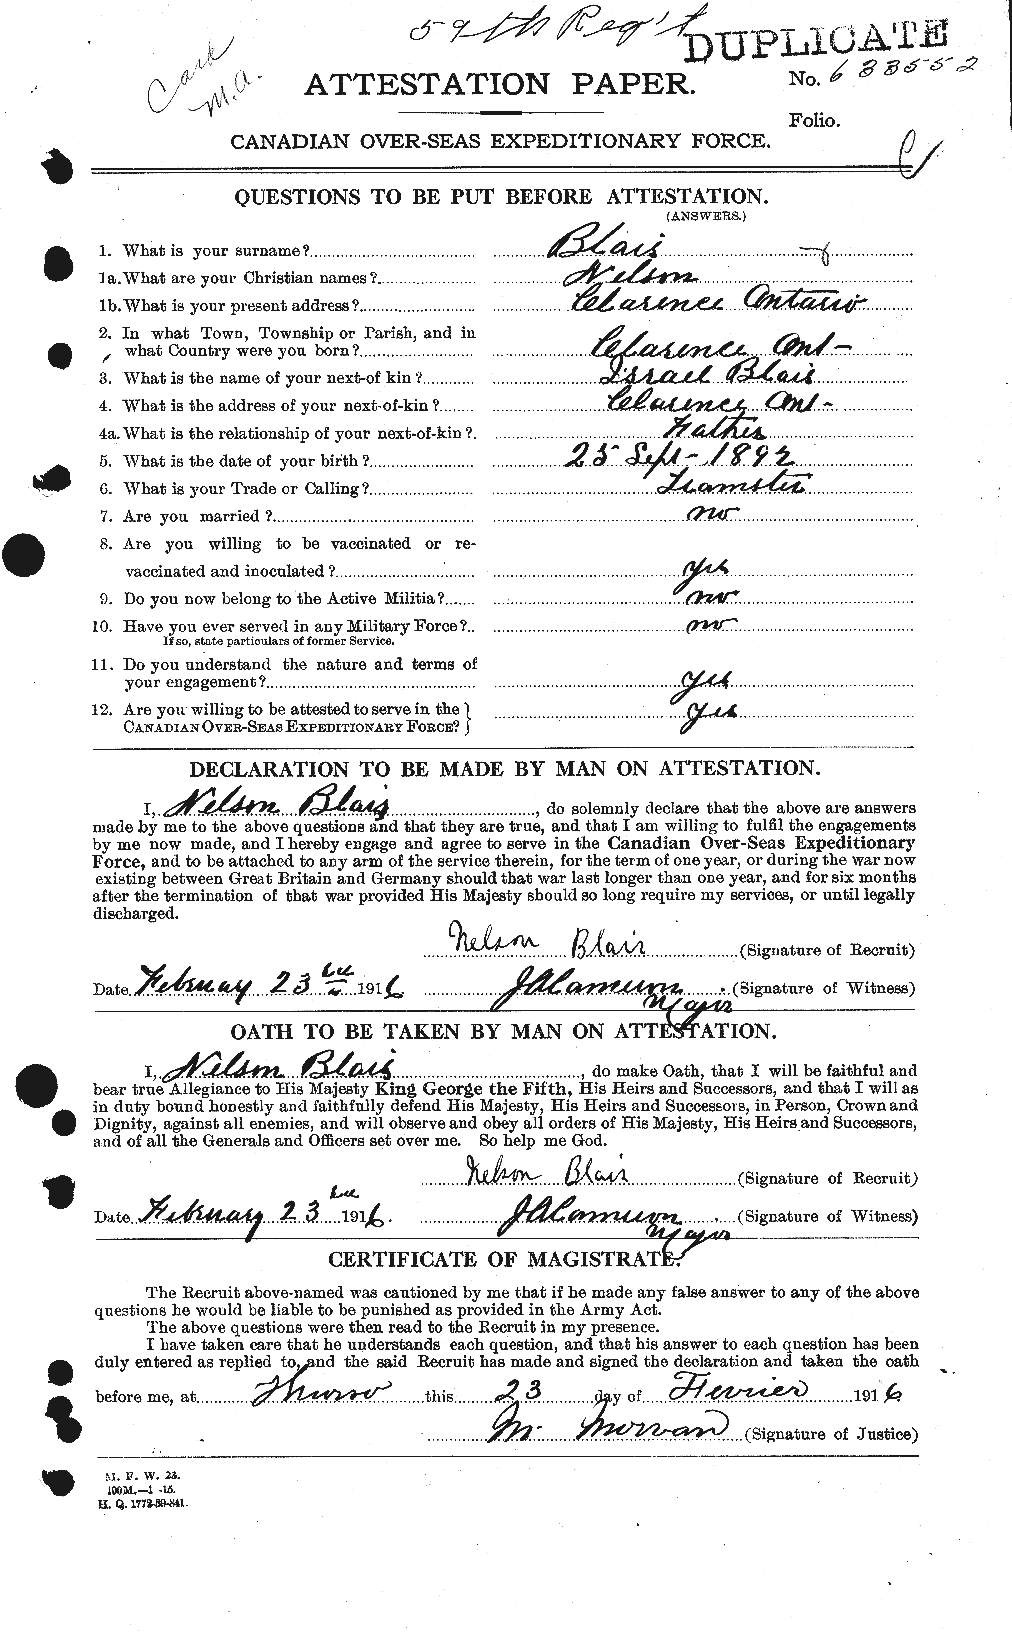 Personnel Records of the First World War - CEF 245502a